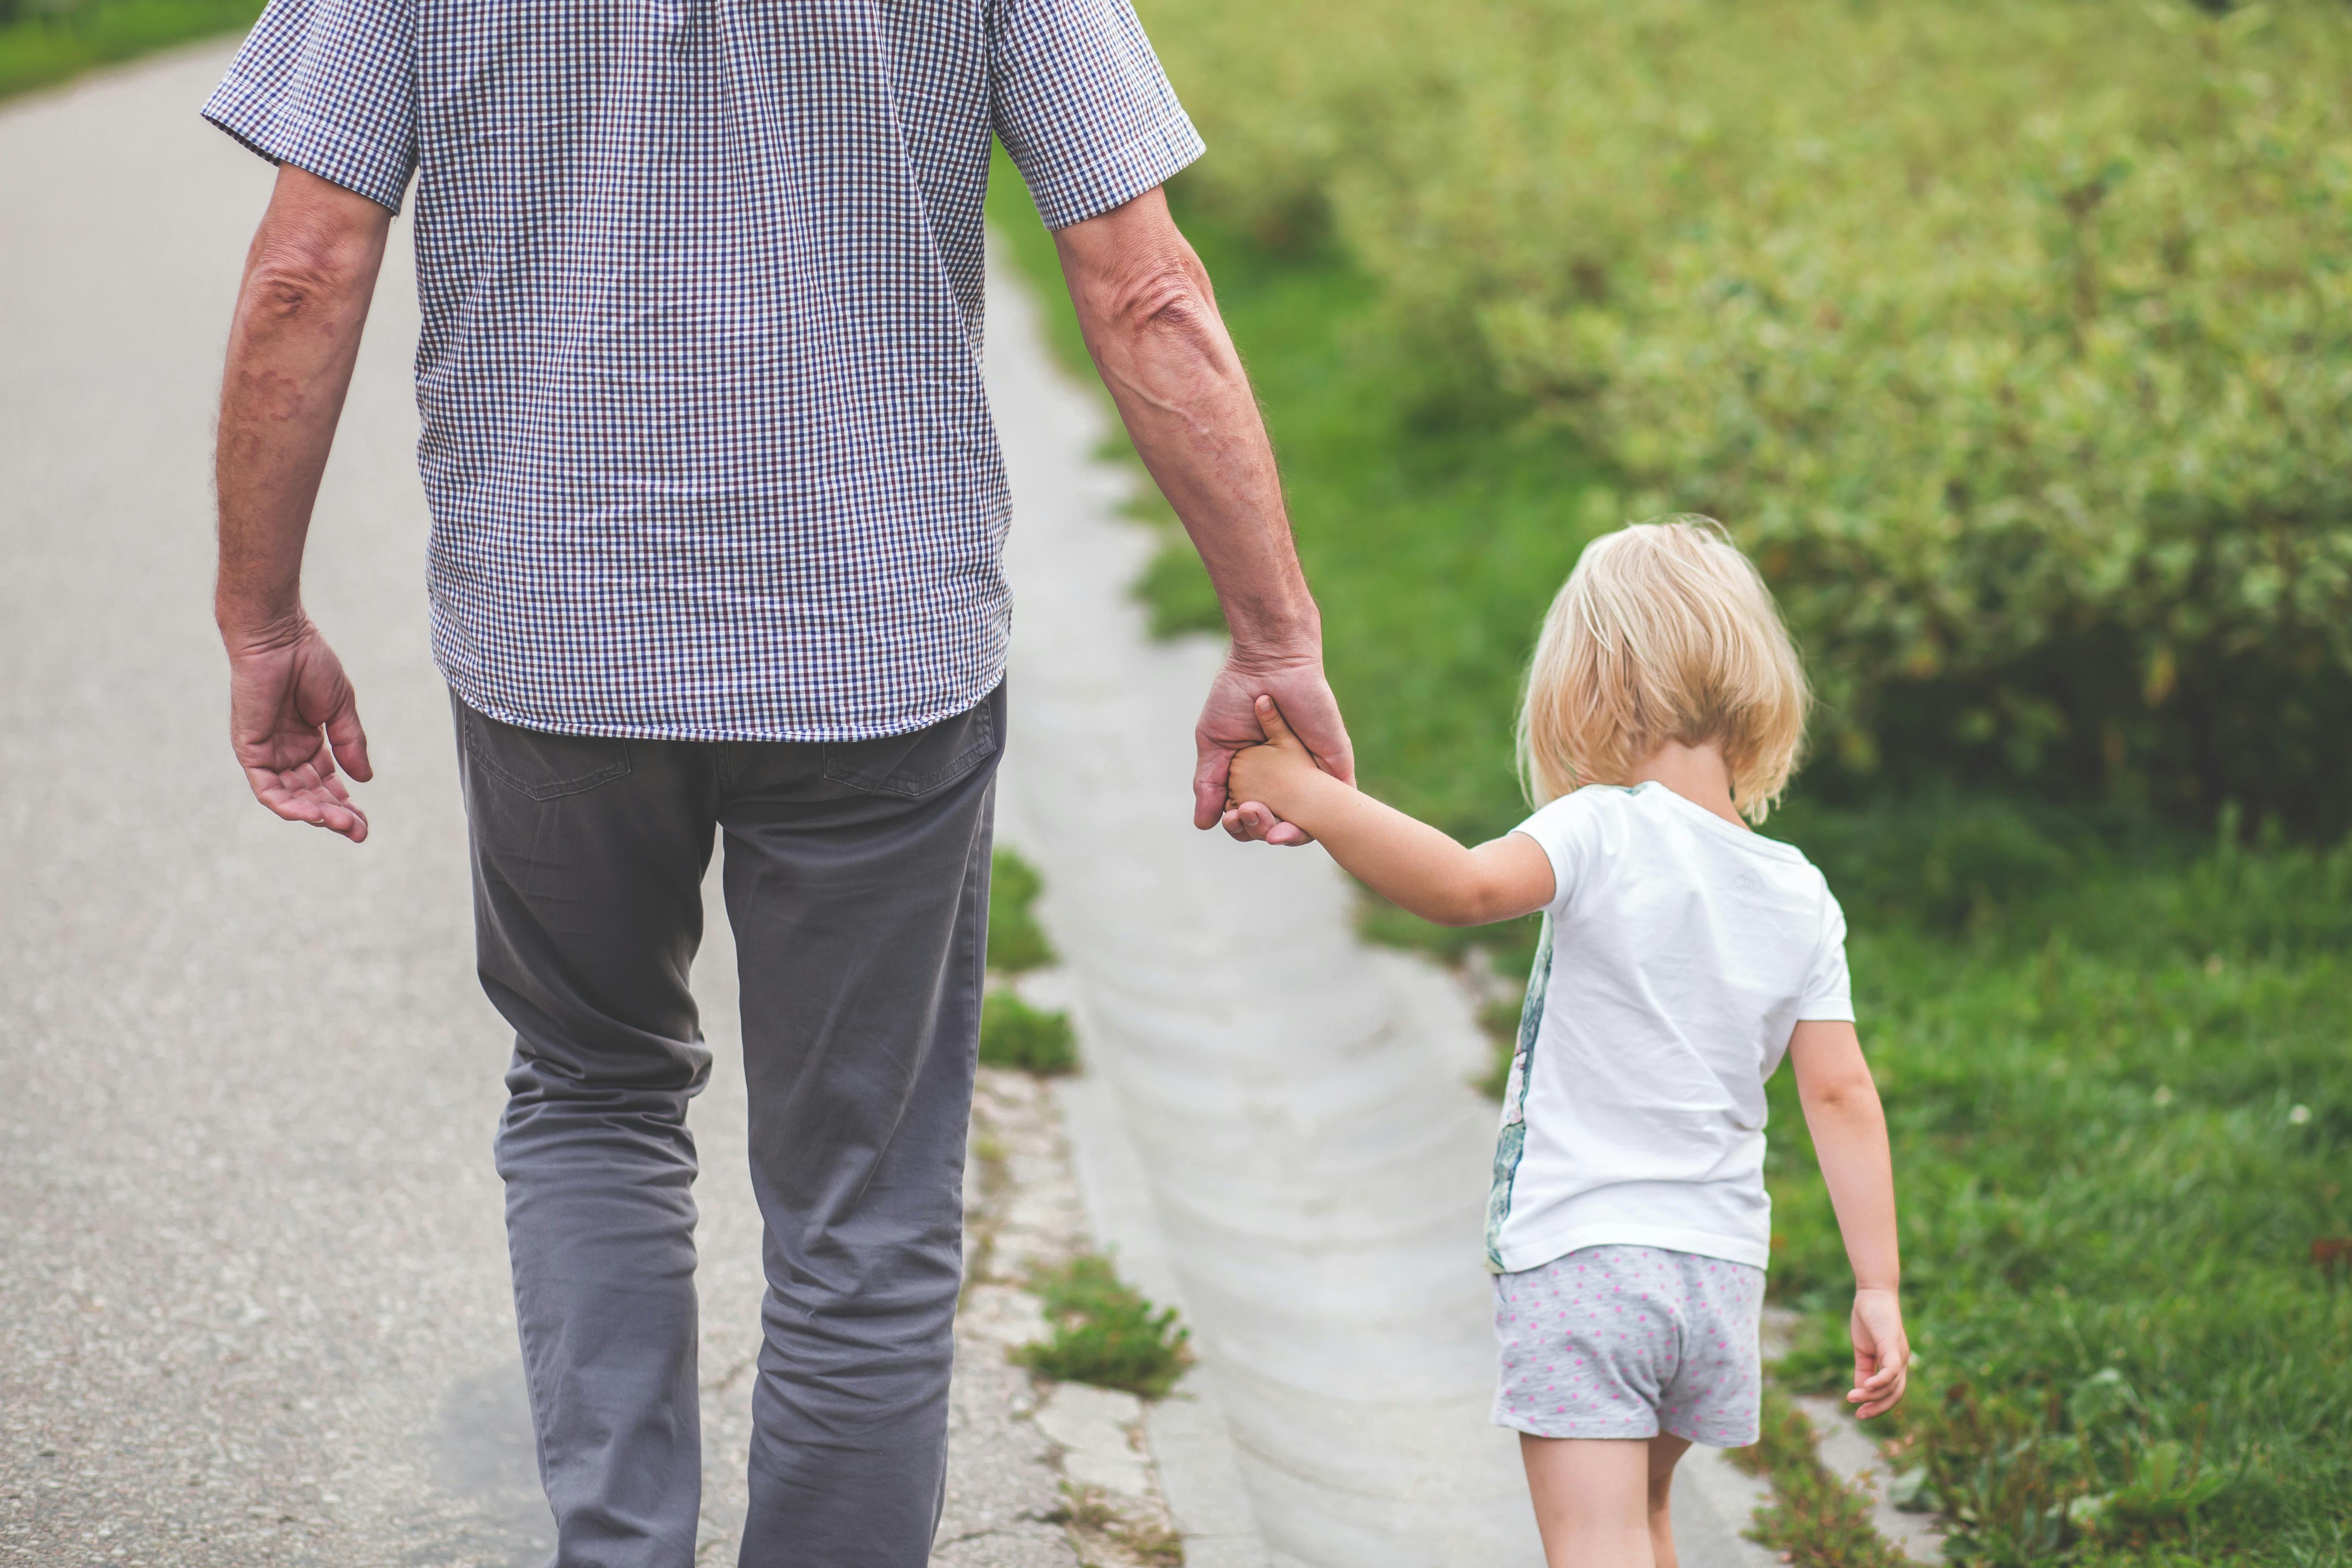 A father and his young daughter walk hand-in-hand.